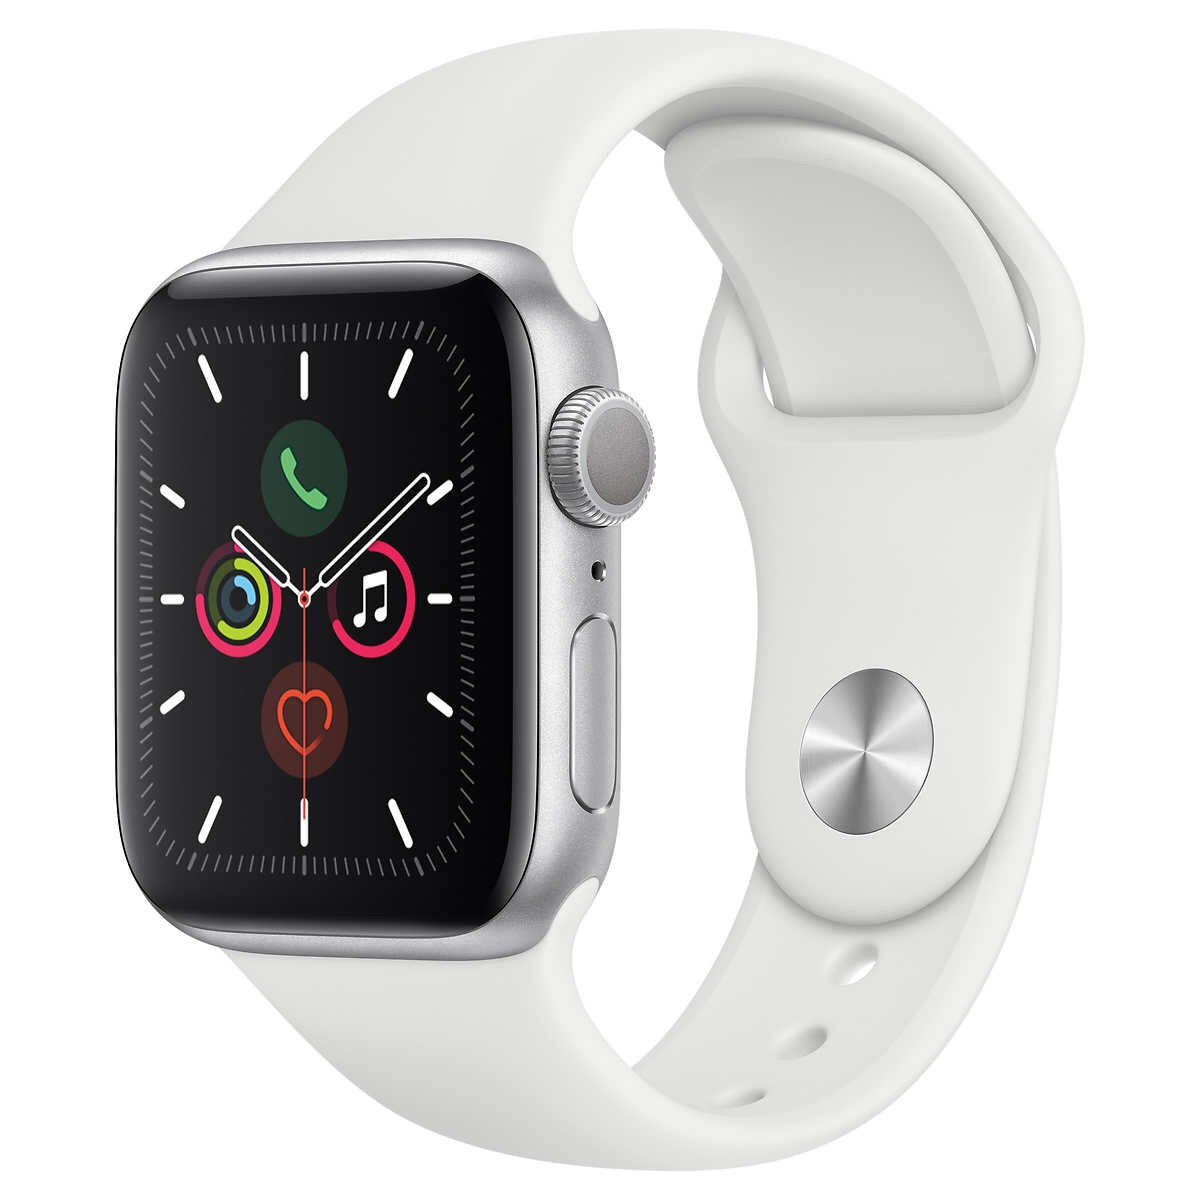 Apple Watch Series 5 GPS with White Sport Band - 40mm - Silver 苹果手表 5 GPS